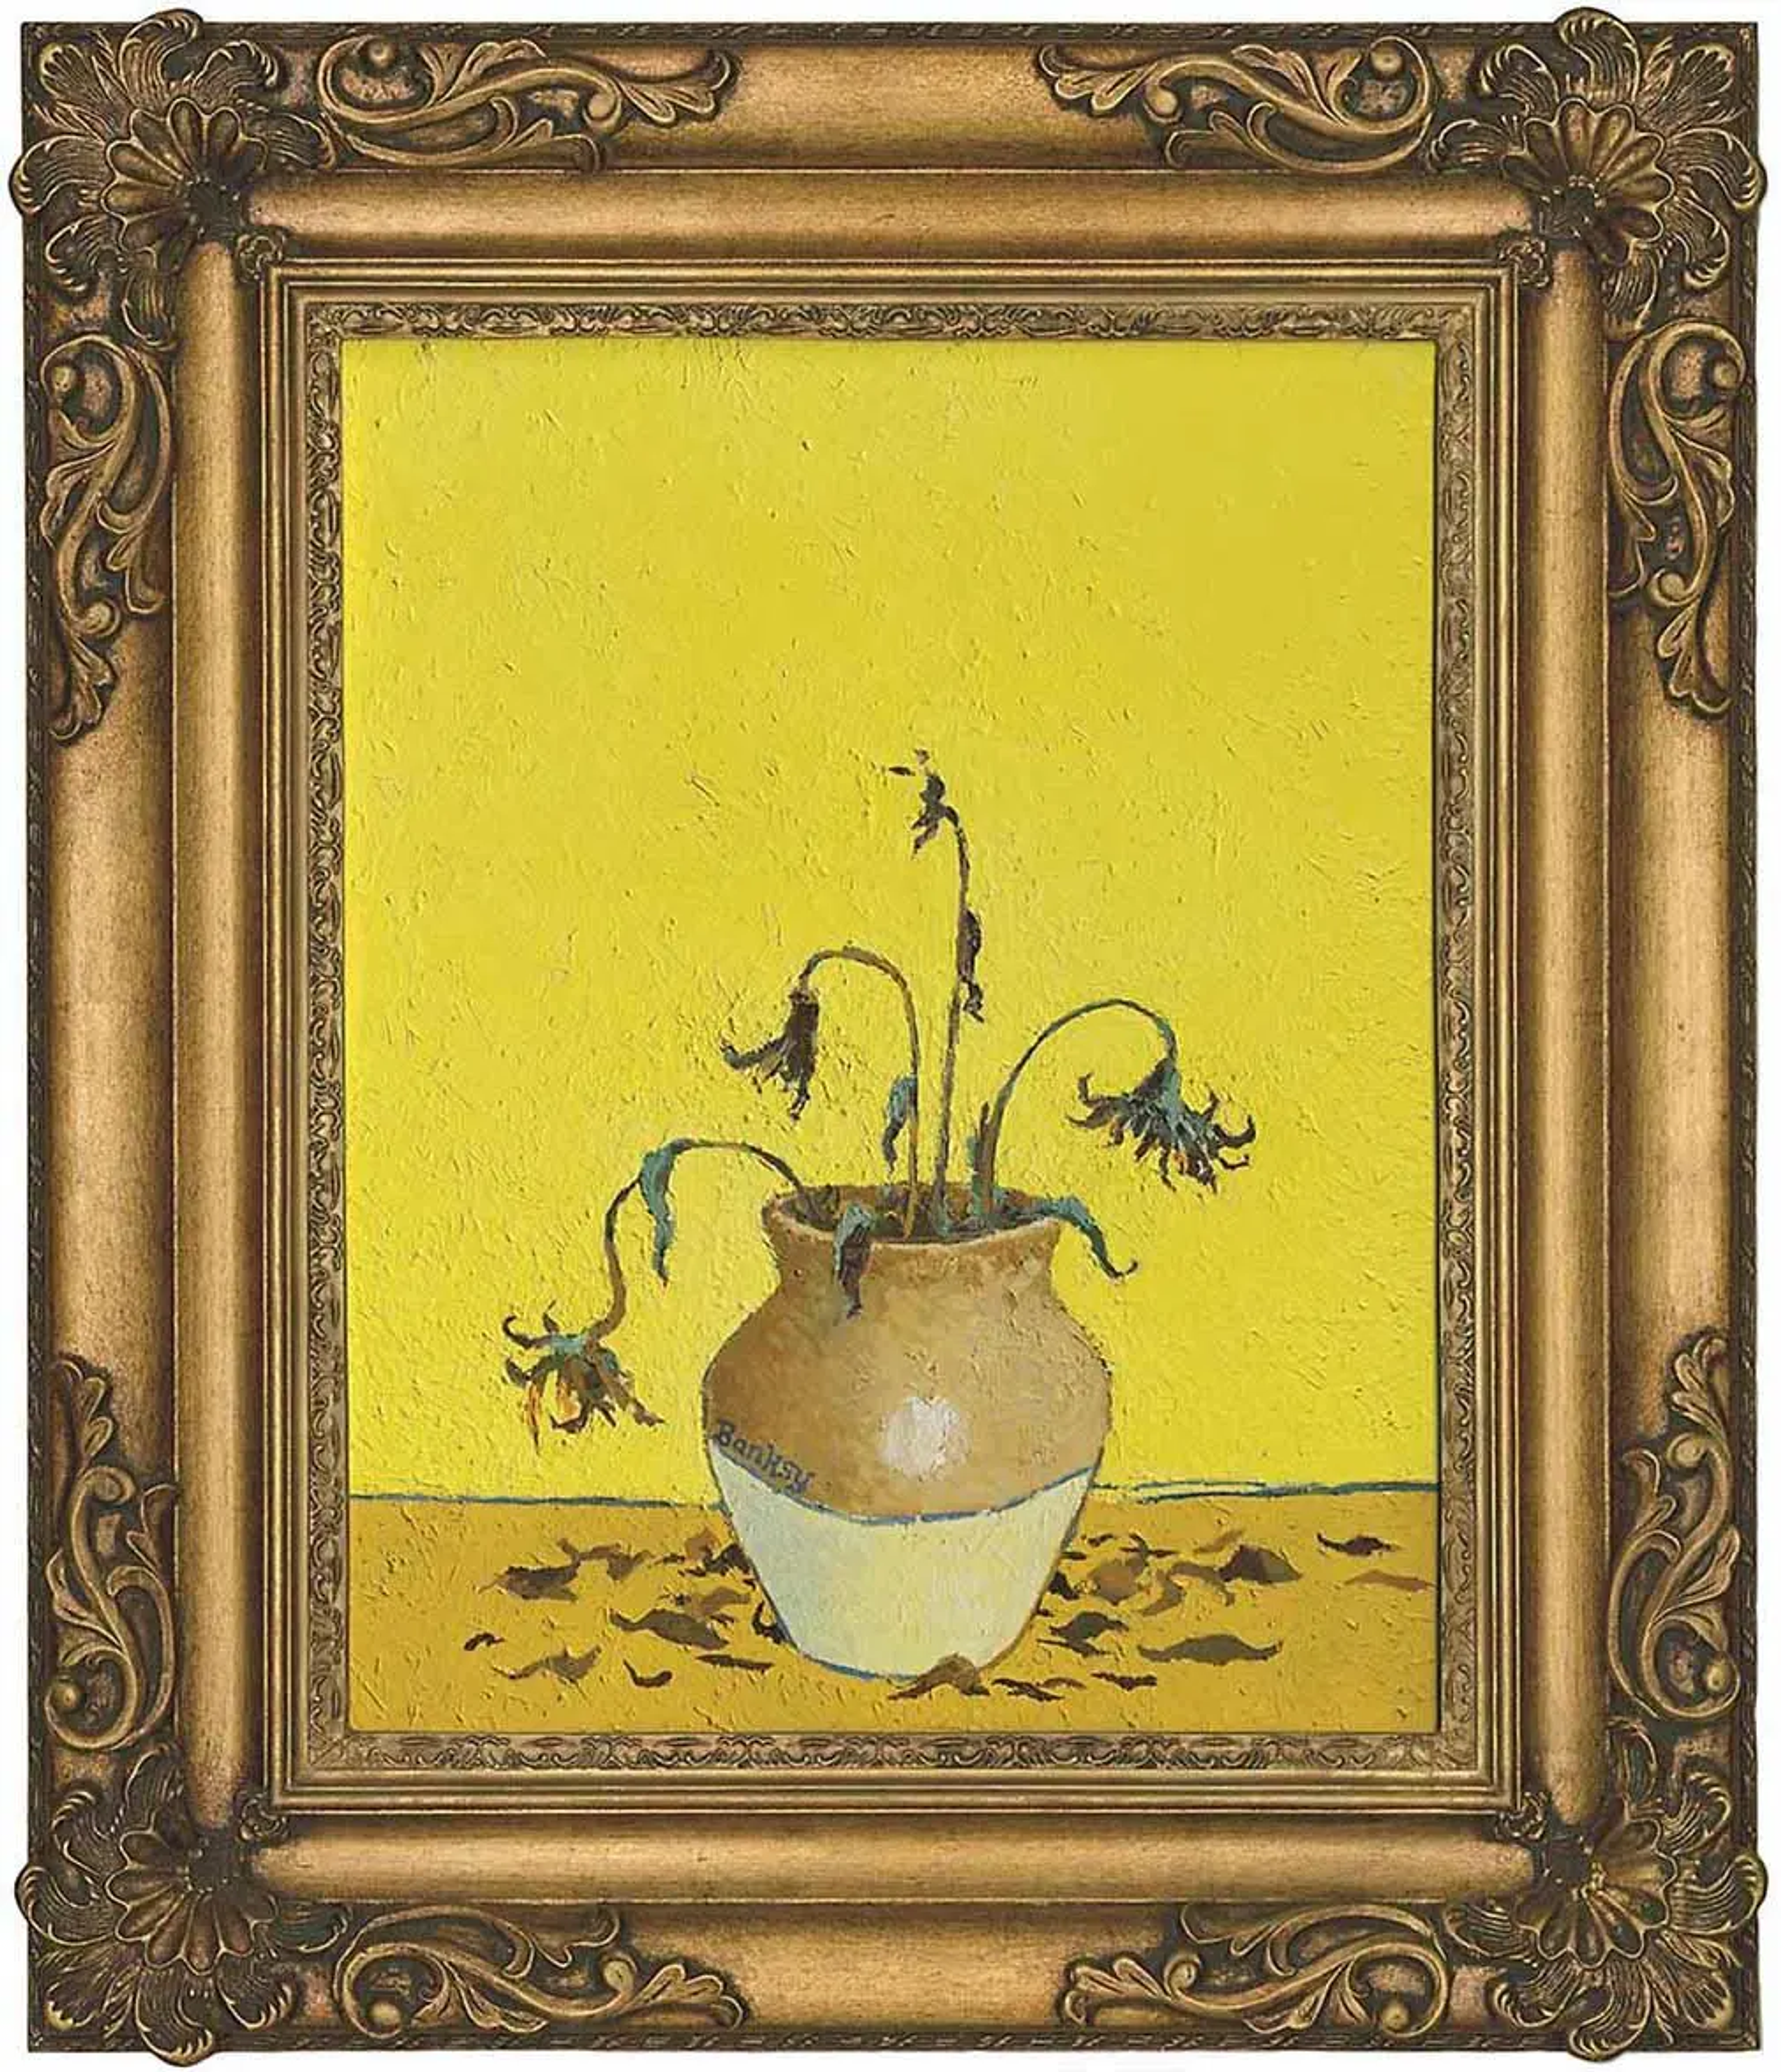 This re-telling of Vincent Van Gogh's sunflowers by Banksy transform the iconic composition into a more barren one, as the sunflowers are shown dead and decaying.